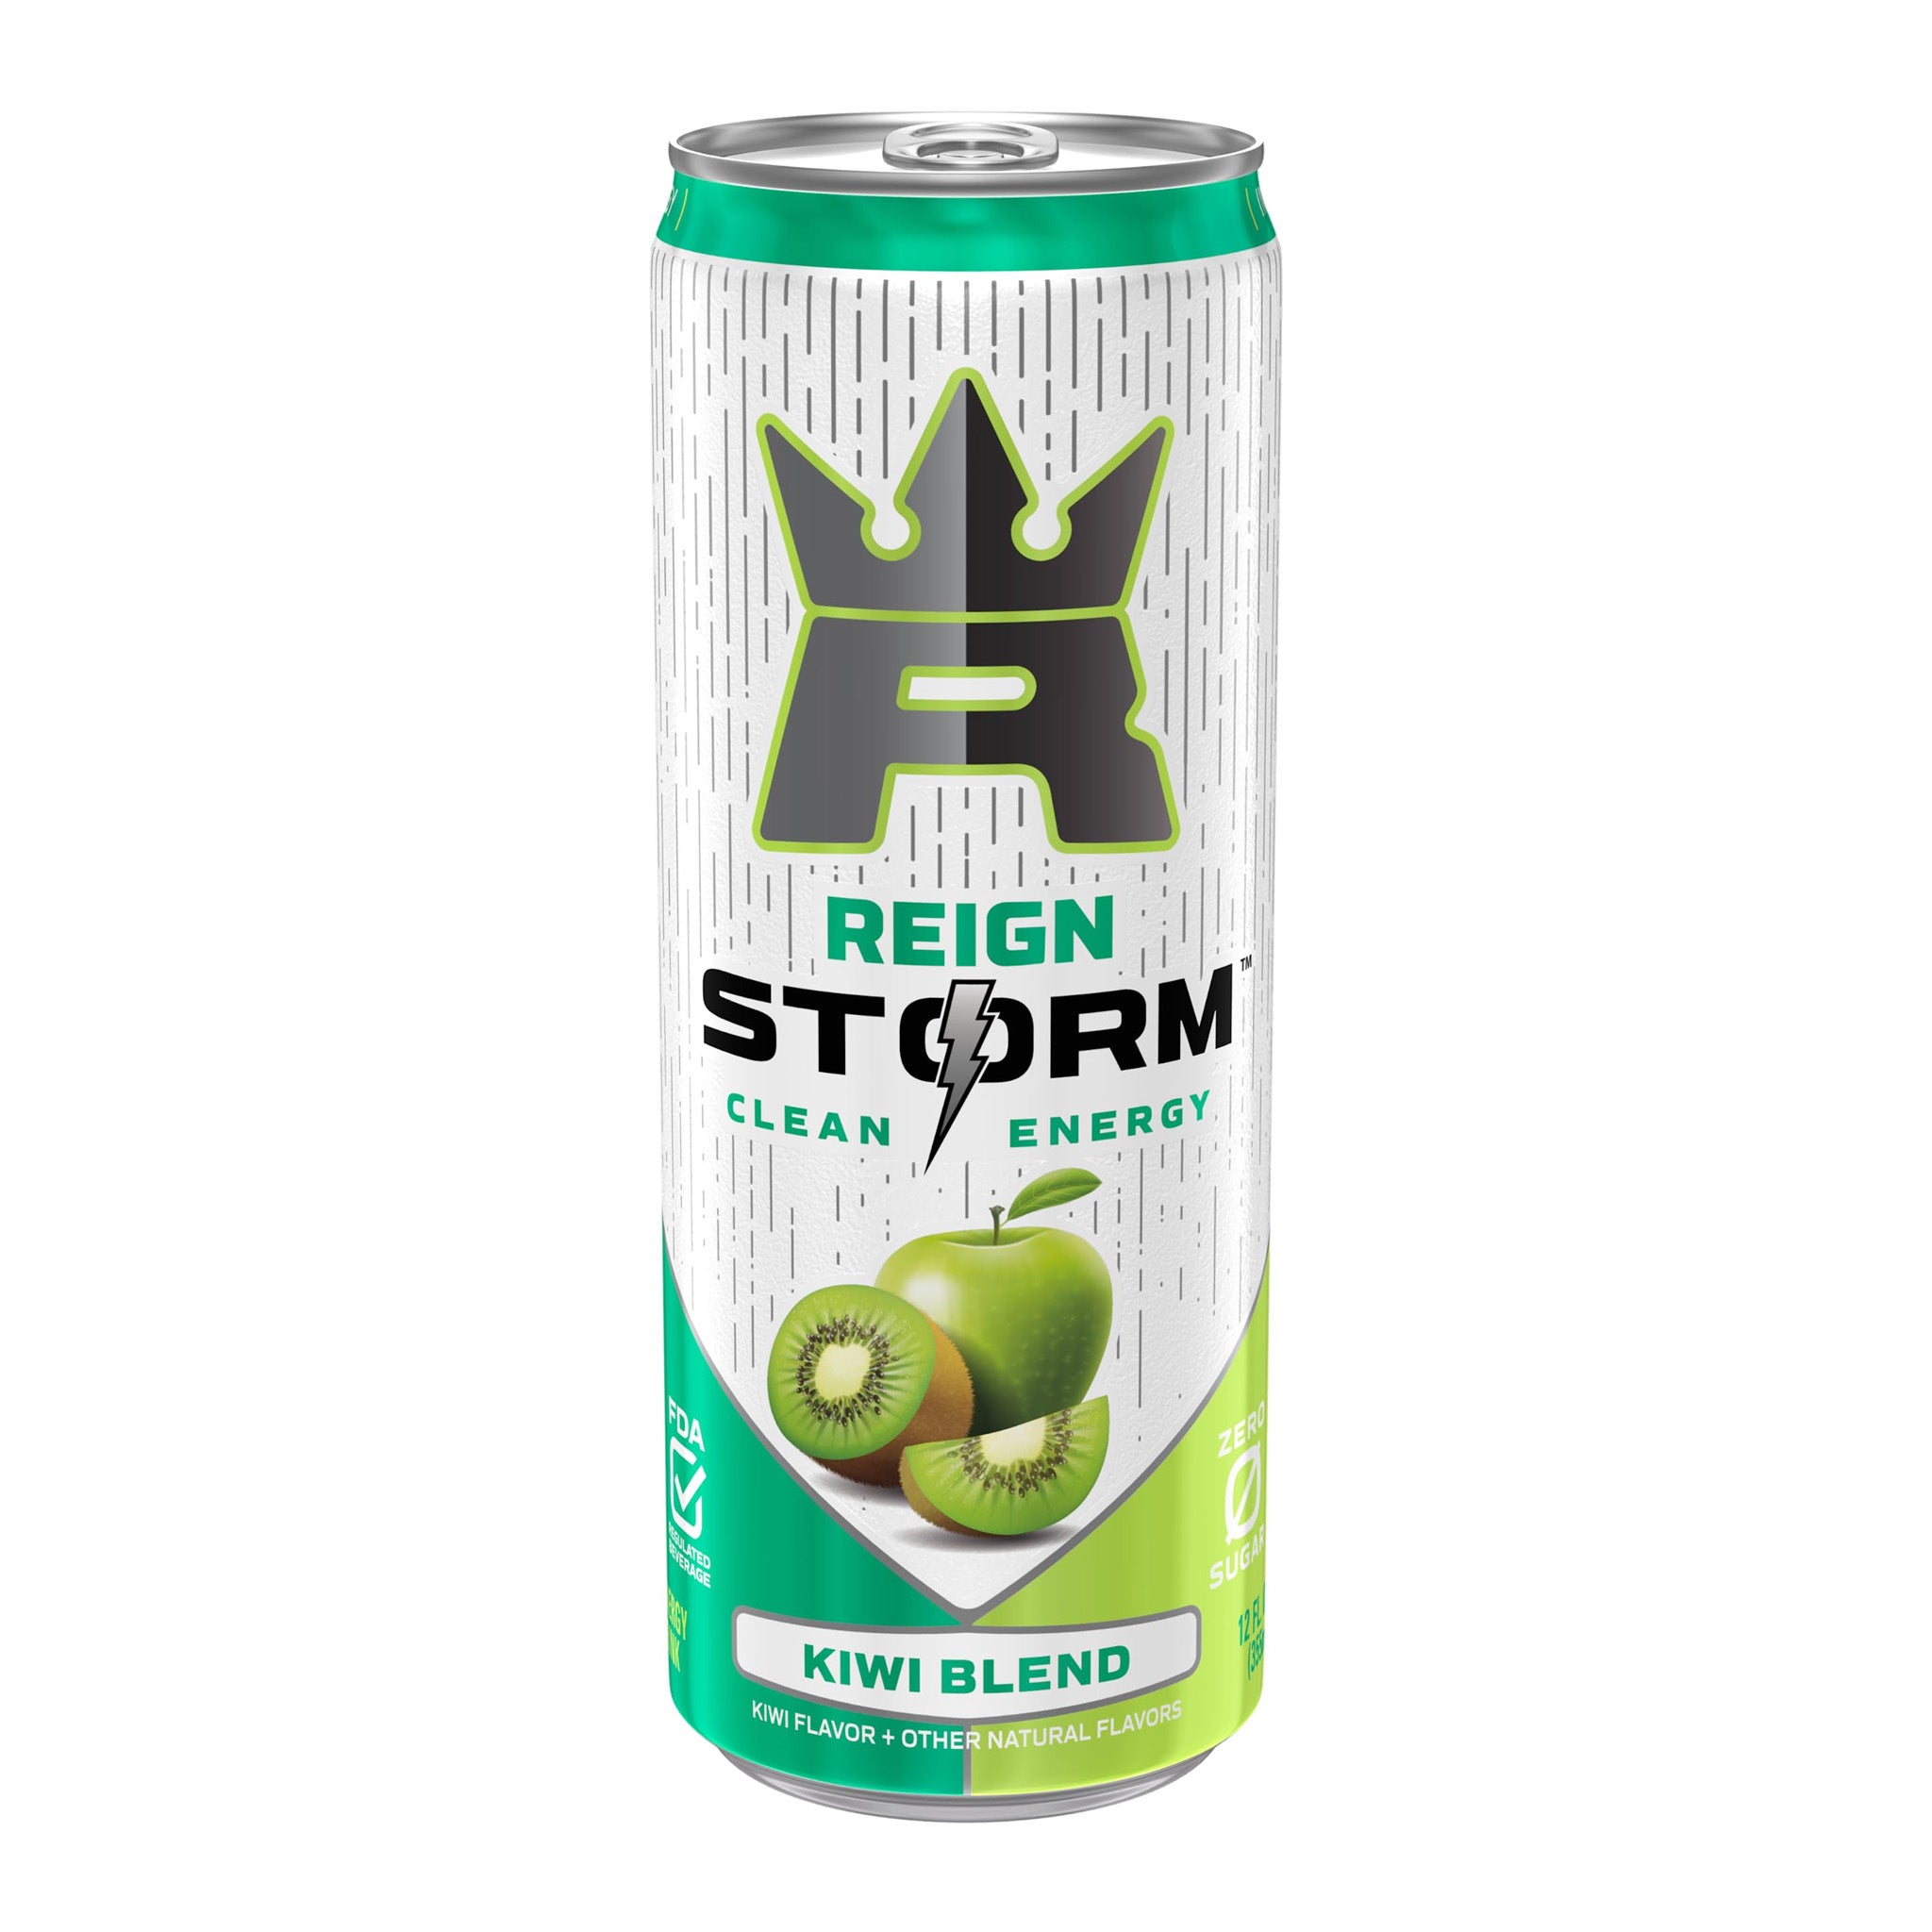 Reign Storm (1 Can)